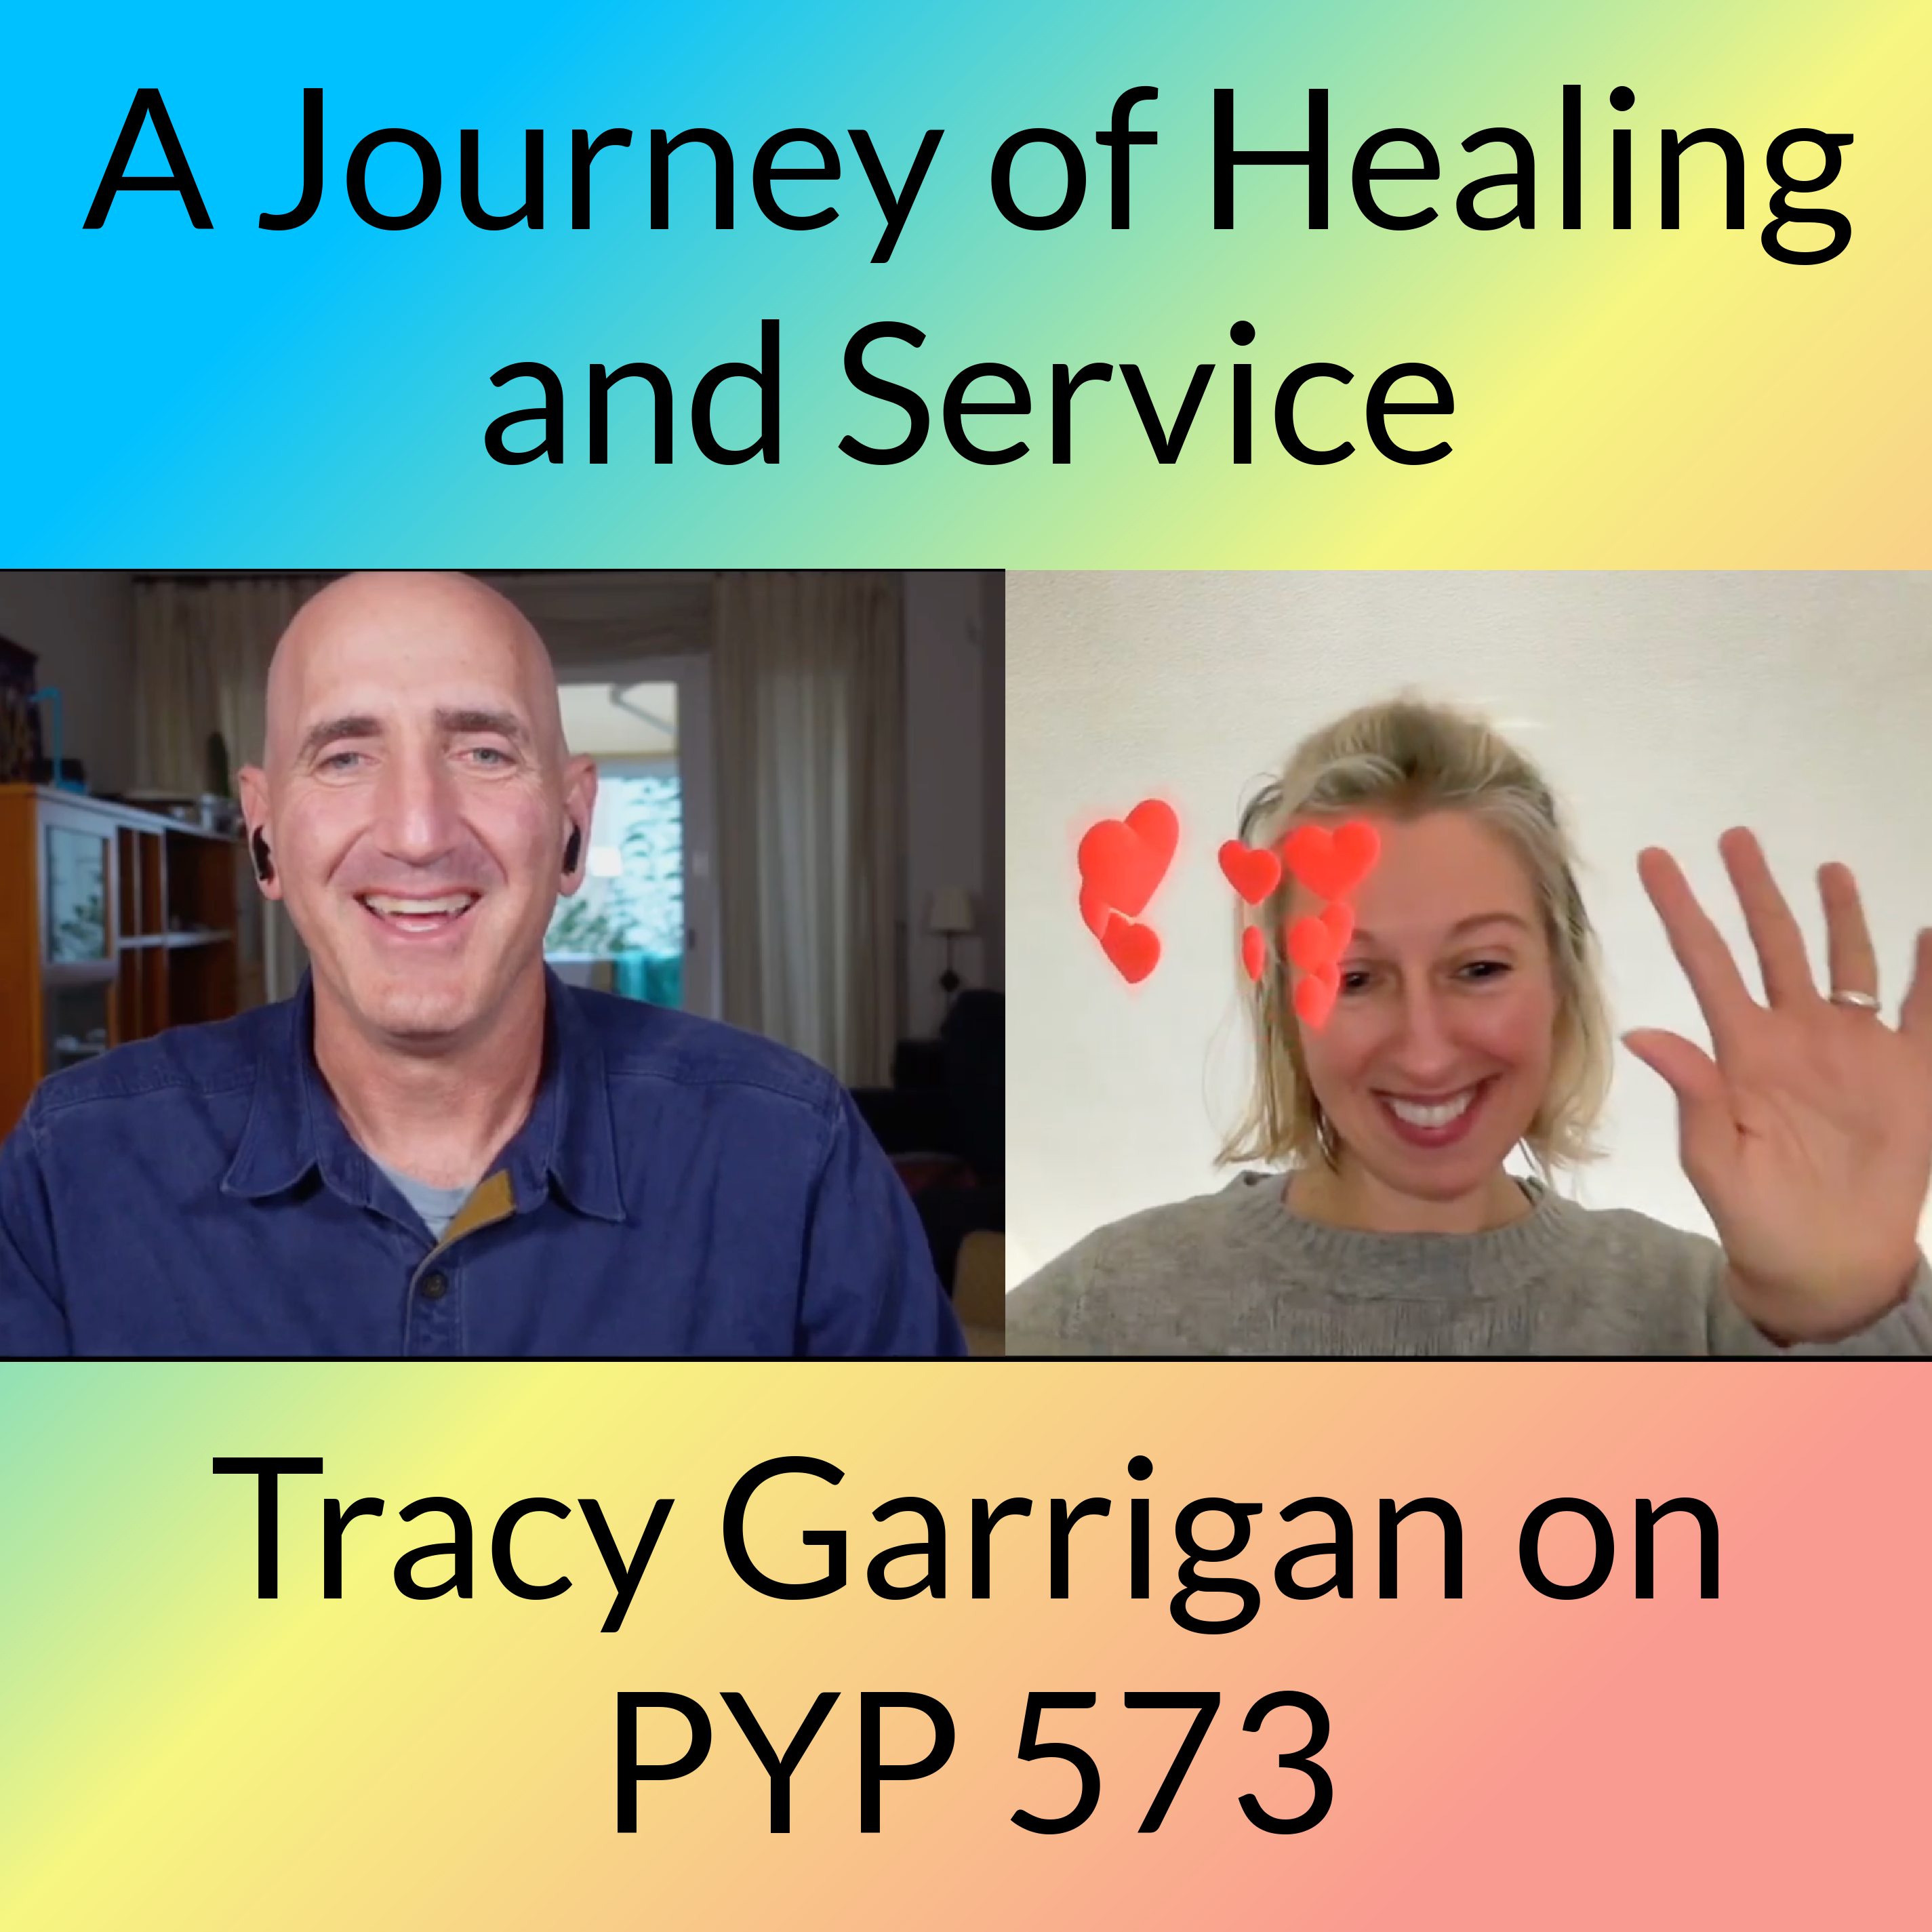 A Journey of Healing and Service: Tracy Garrigan on PYP 573